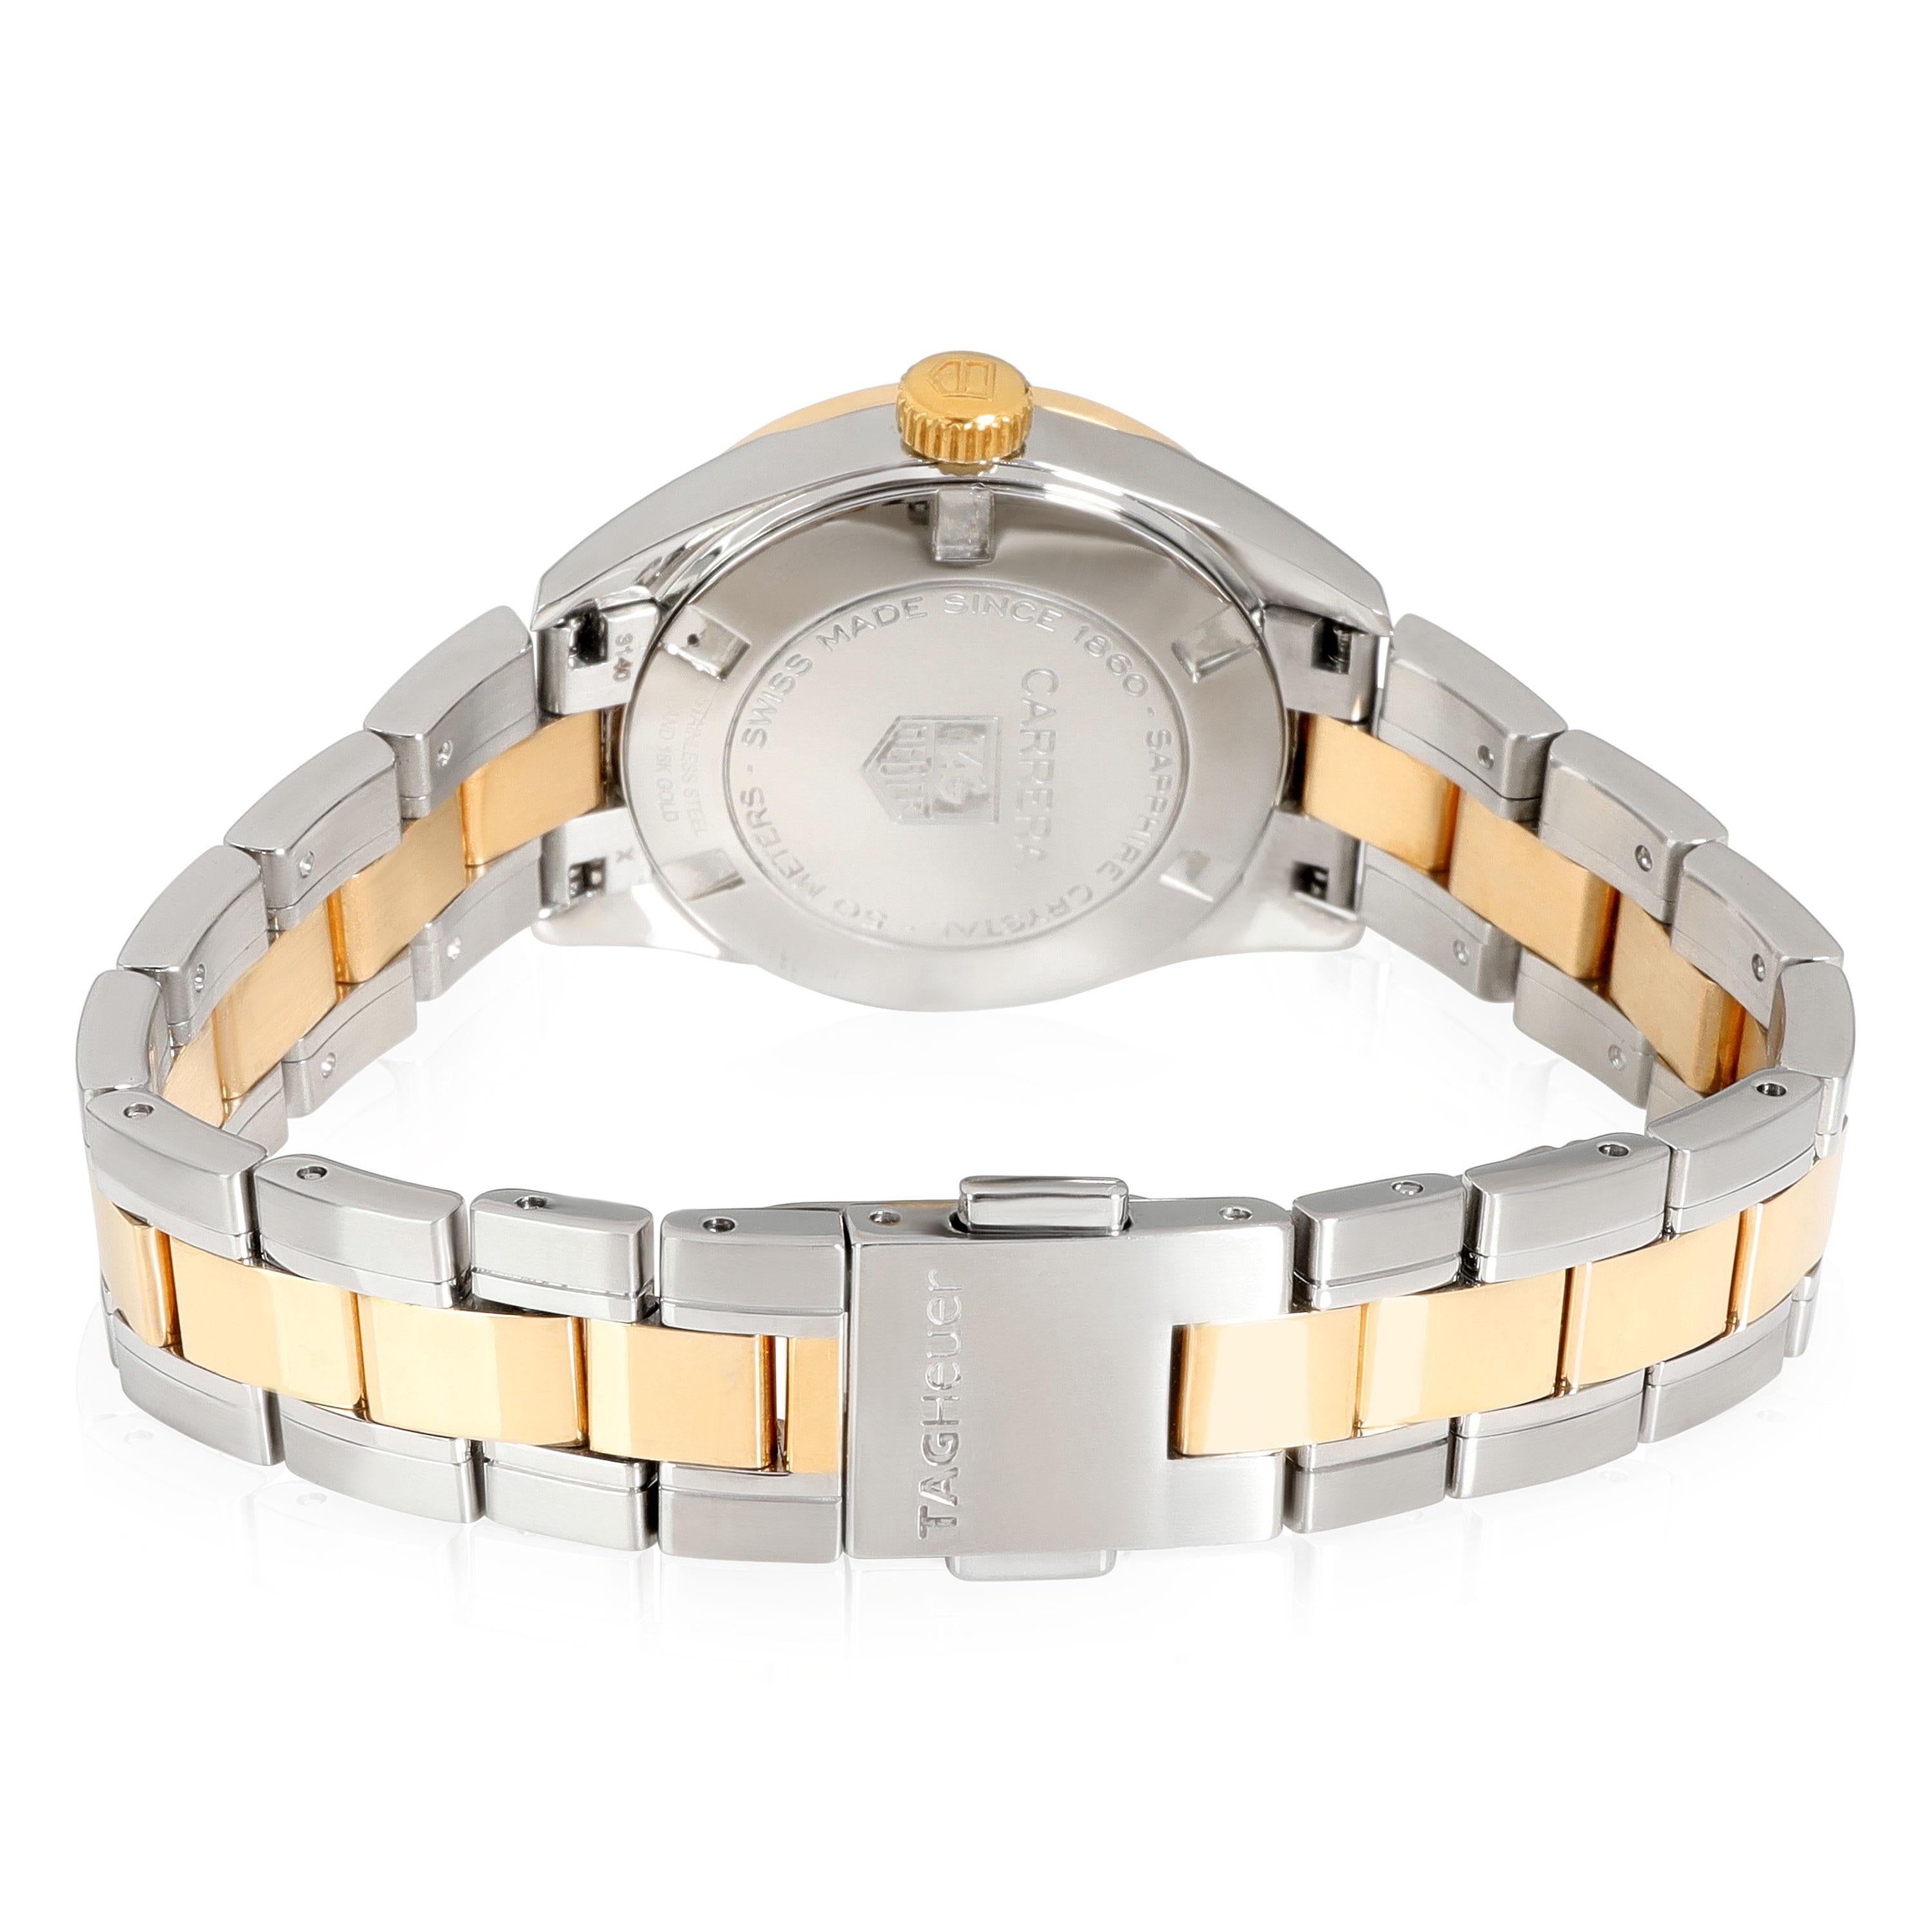 Tag Heuer Carrera WV1450.BD0797 Women's Watch in 18kt Stainless Steel/Yellow Gol

SKU: 112580

PRIMARY DETAILS
Brand: Tag Heuer
Model: Carrera
Country of Origin: Switzerland
Movement Type: Quartz: Battery
Year of Manufacture: 2010-2019
Condition: